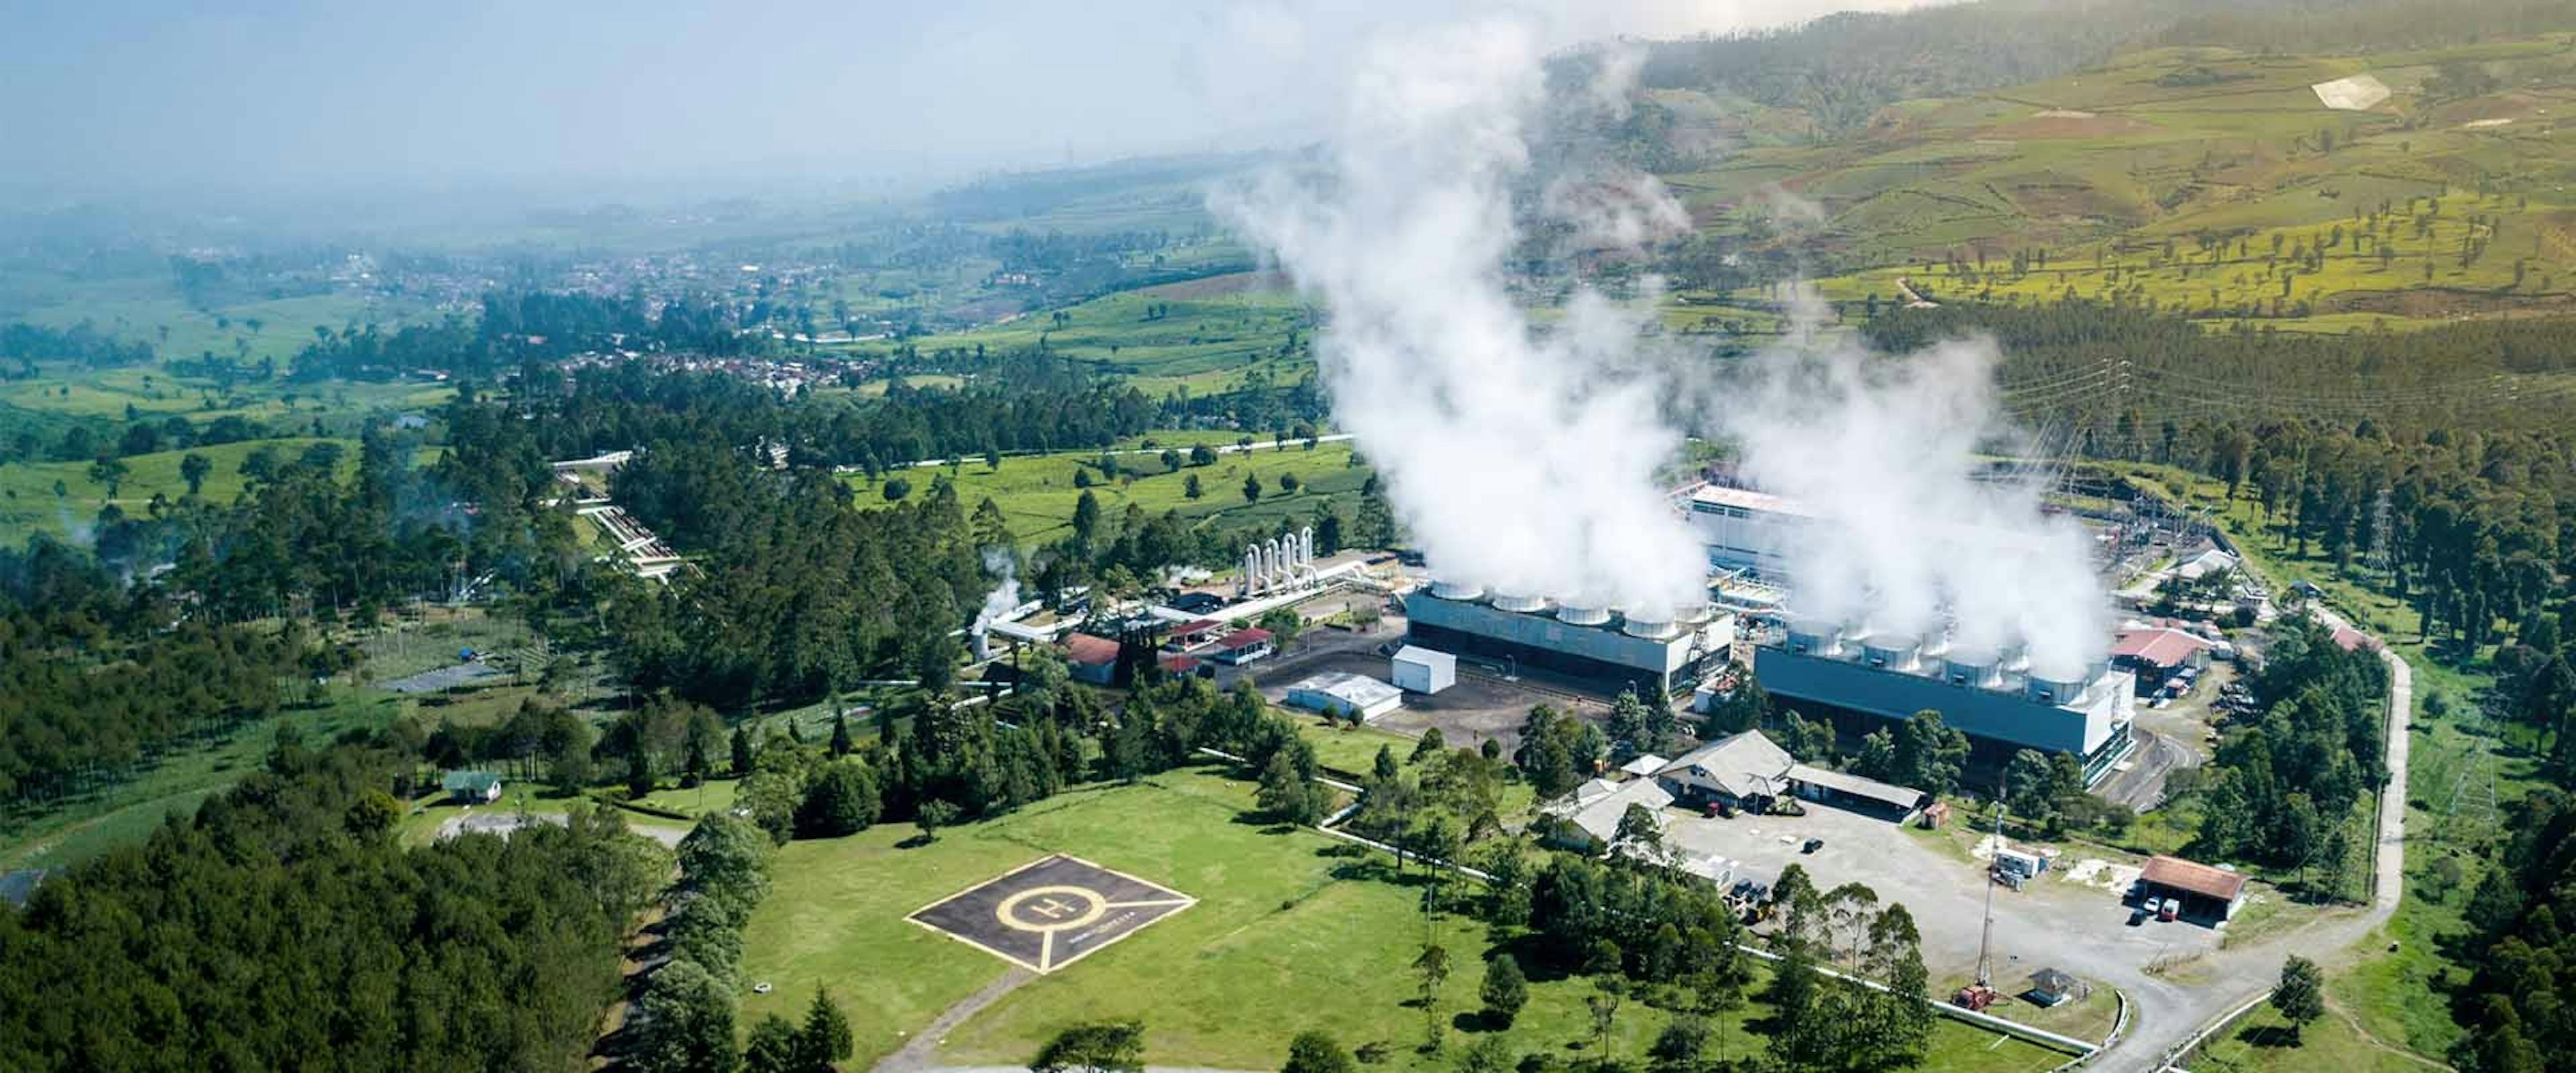 Geothermal power plant in Indonesia